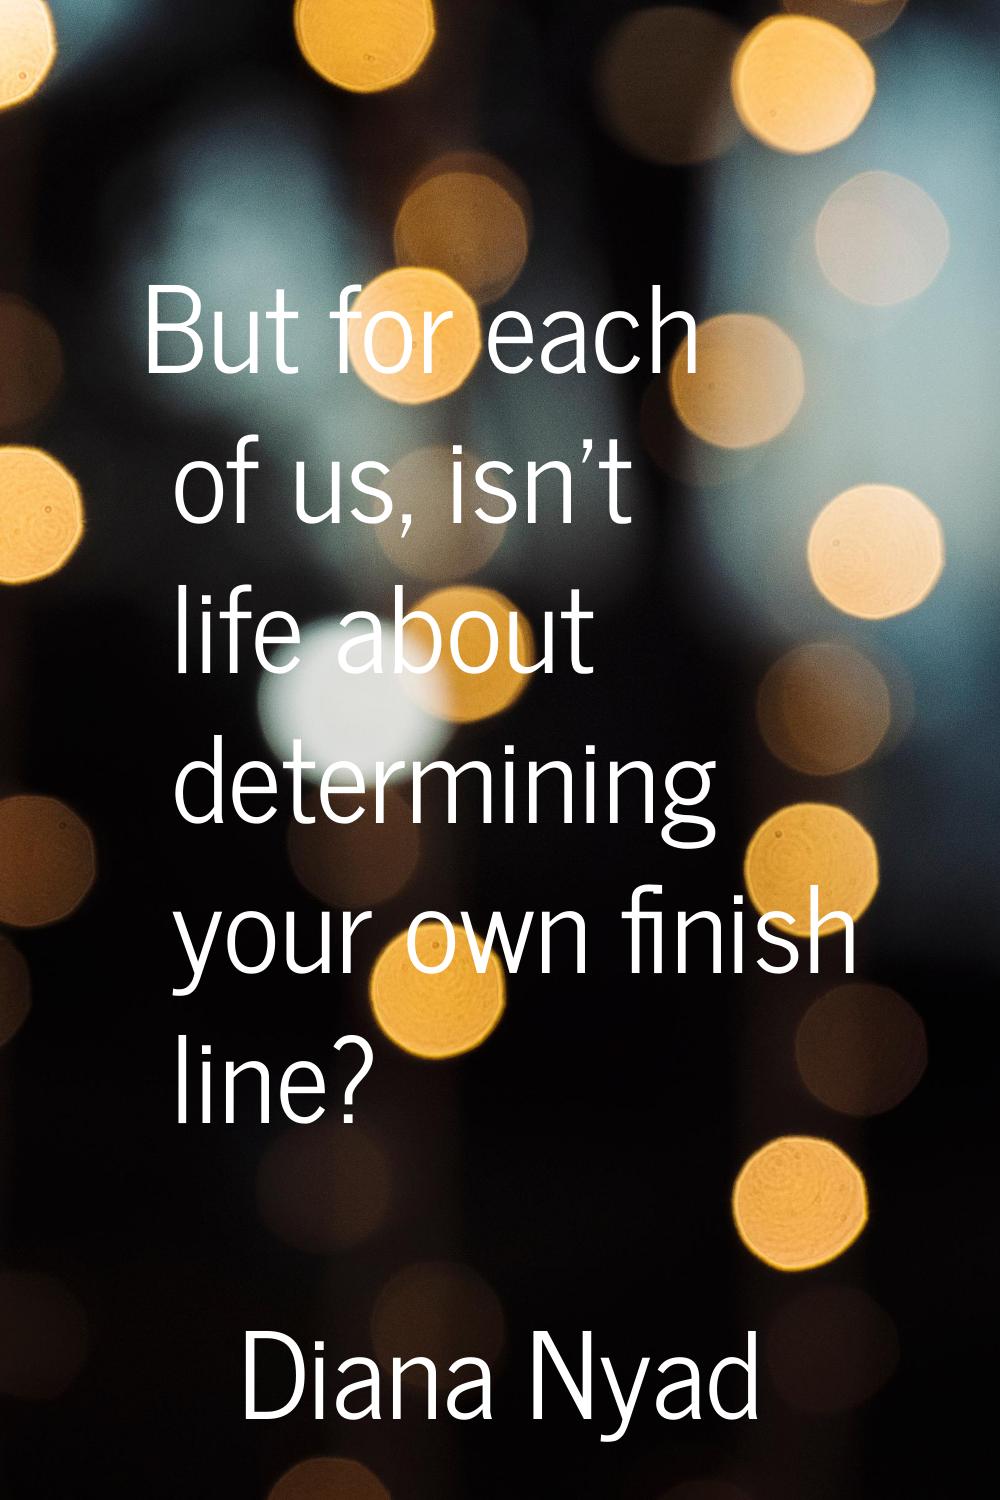 But for each of us, isn't life about determining your own finish line?